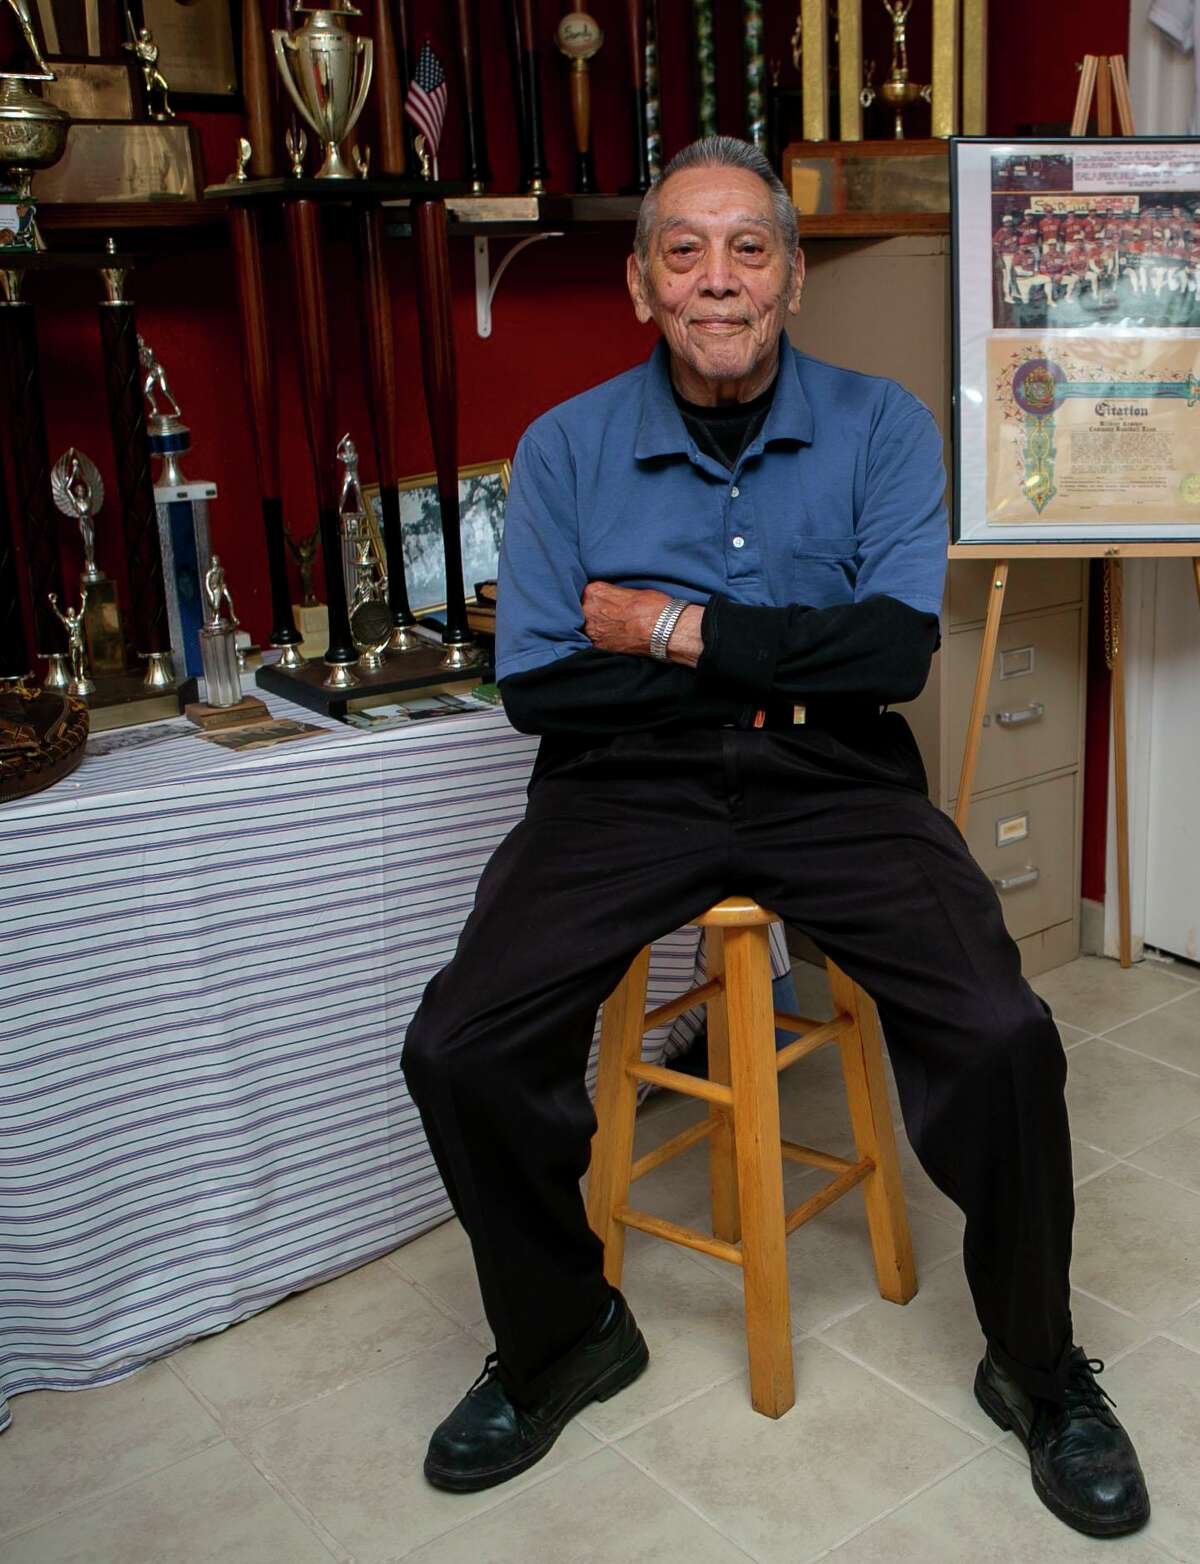 Willie Doria, 95, is one of the last living stars of the Spanish American Baseball League, poses at home of Joe Sanchez, a lifelong friend and the former manager of the league, in San Antonio, Texas on Nov. 26, 2019.